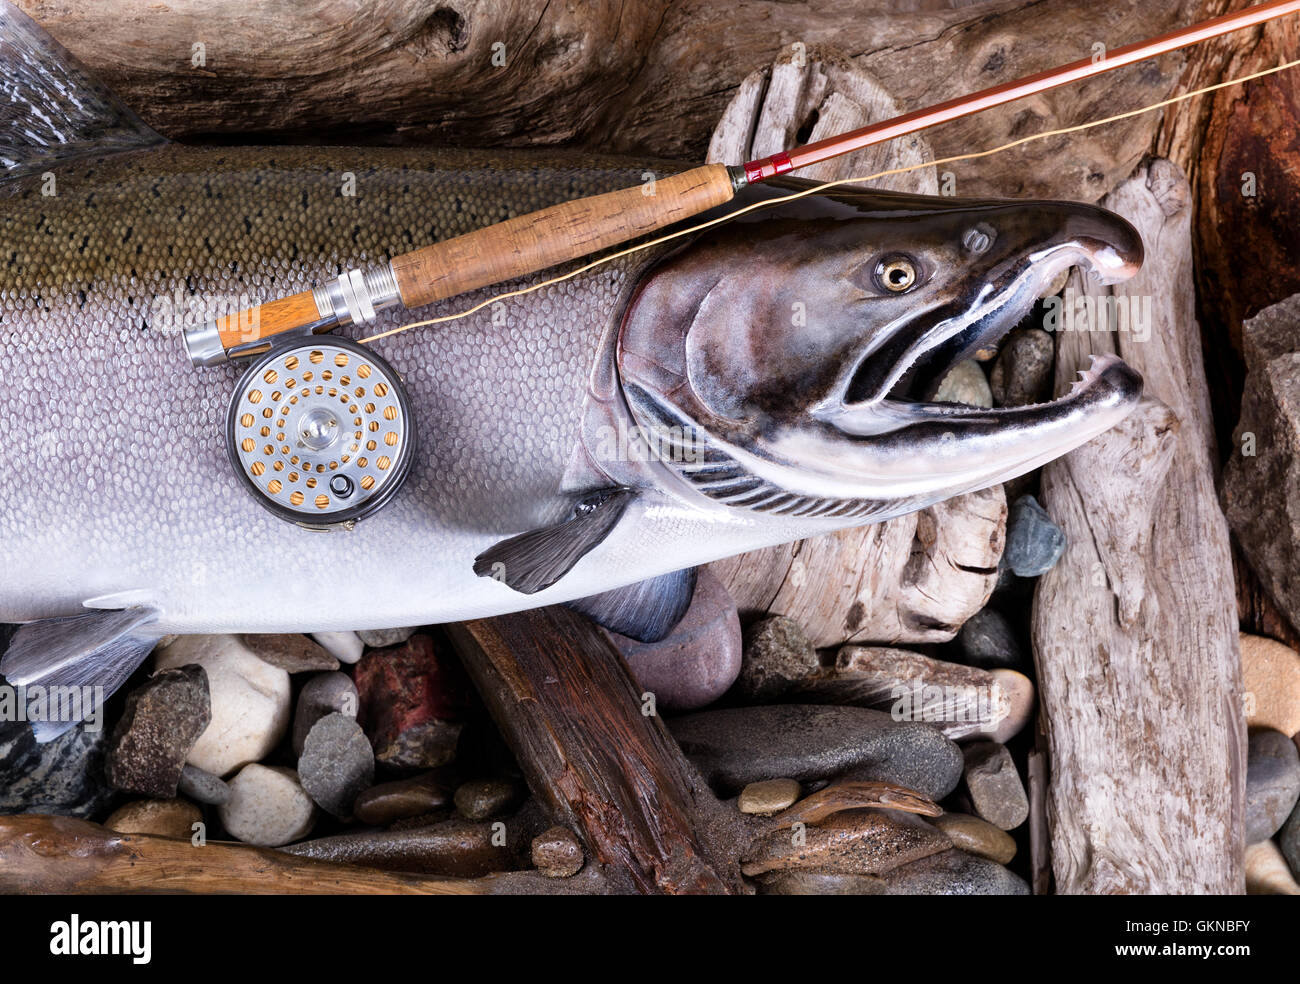 Top view of antique fly rod and reel on large trout with stones and drift wood in background. Stock Photo